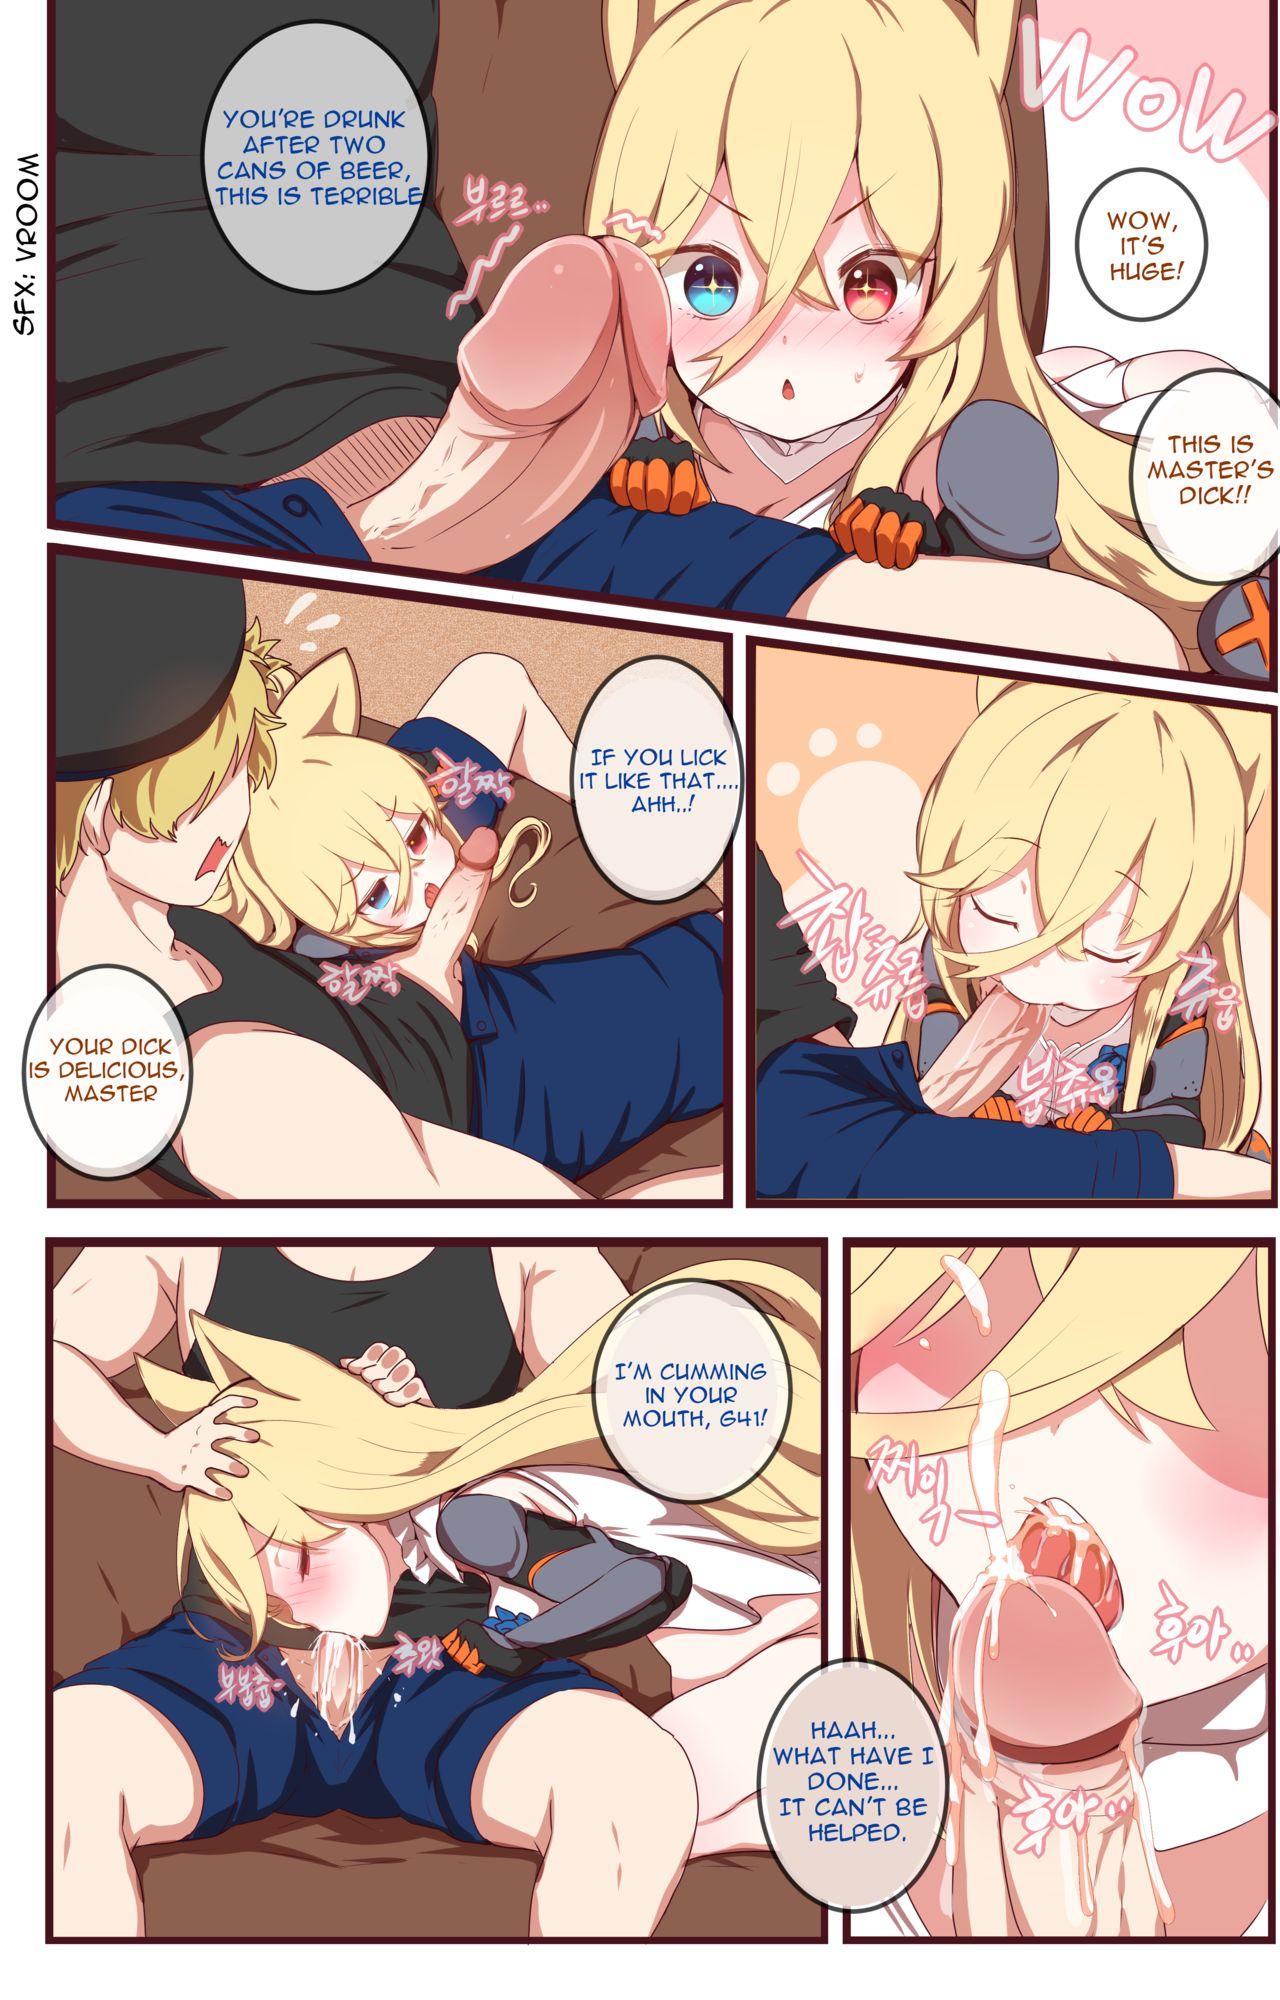 Blows How to use dolls 04 - Girls frontline Com - Page 5